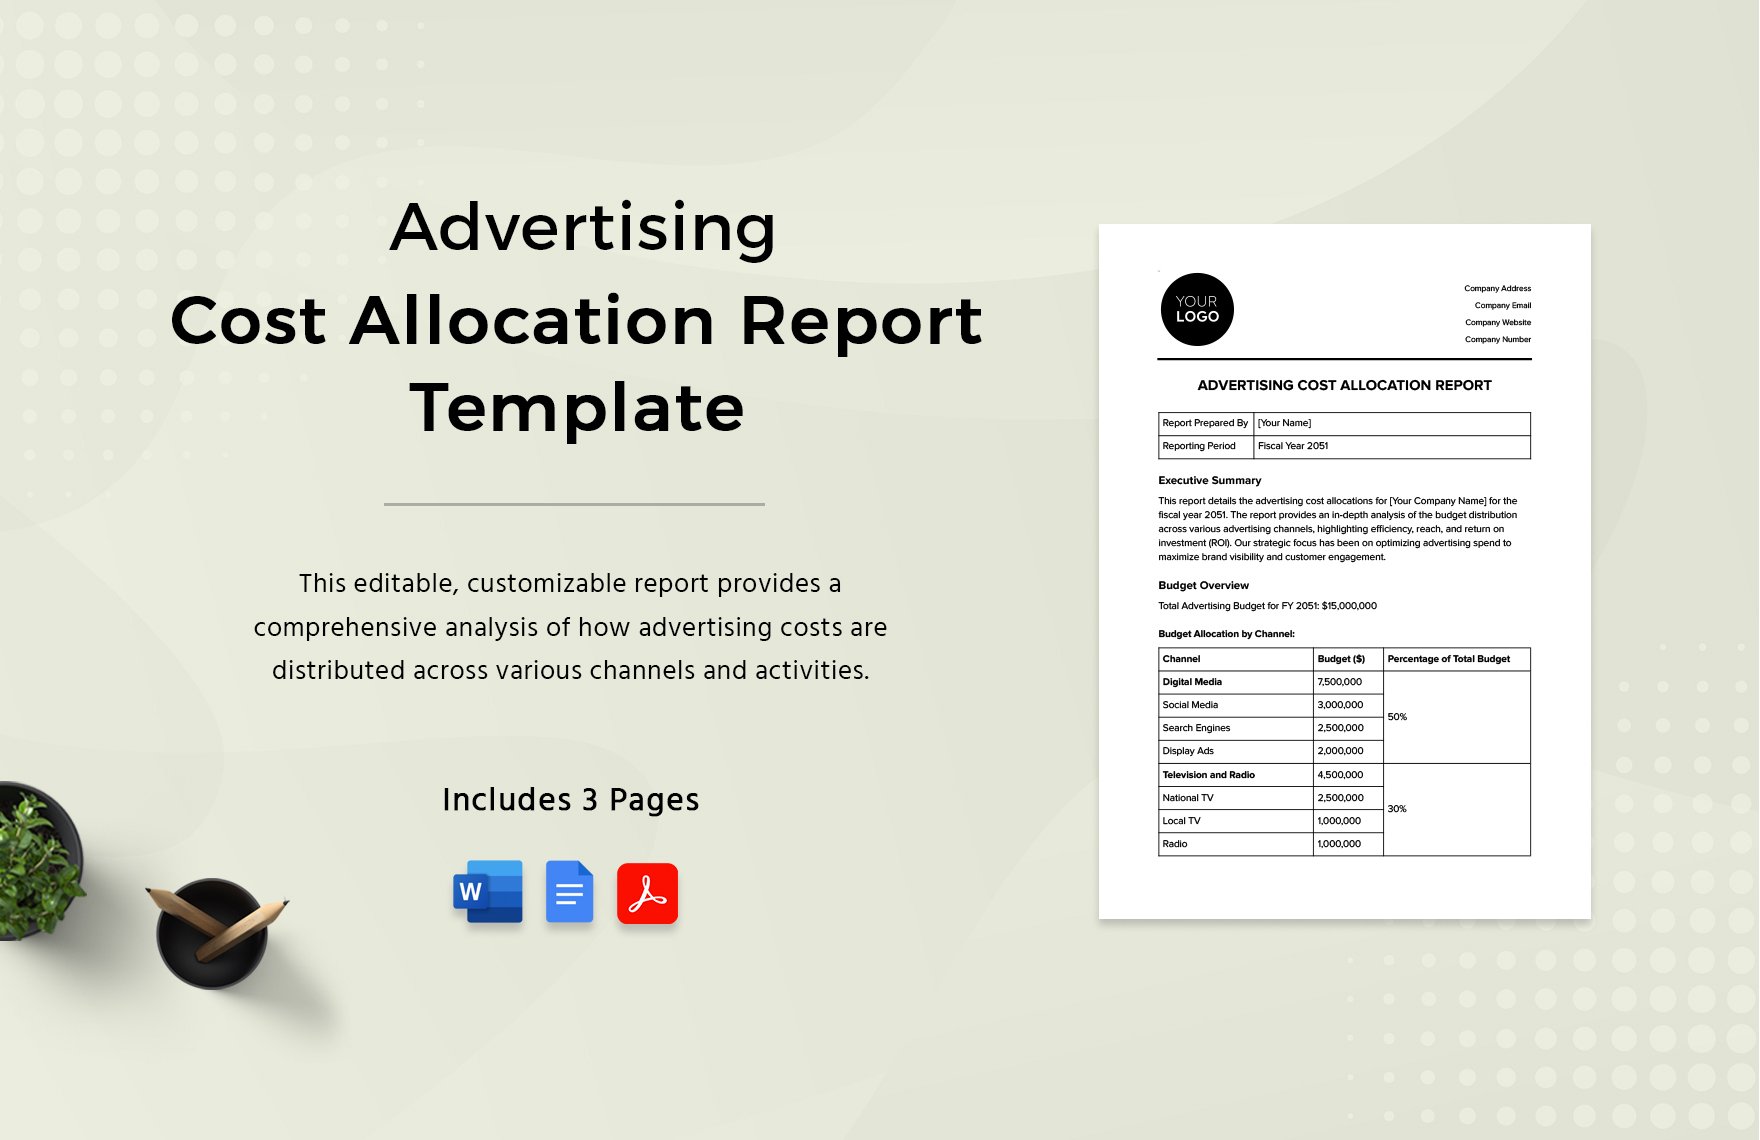 Advertising Cost Allocation Report Template in Word, Google Docs, PDF